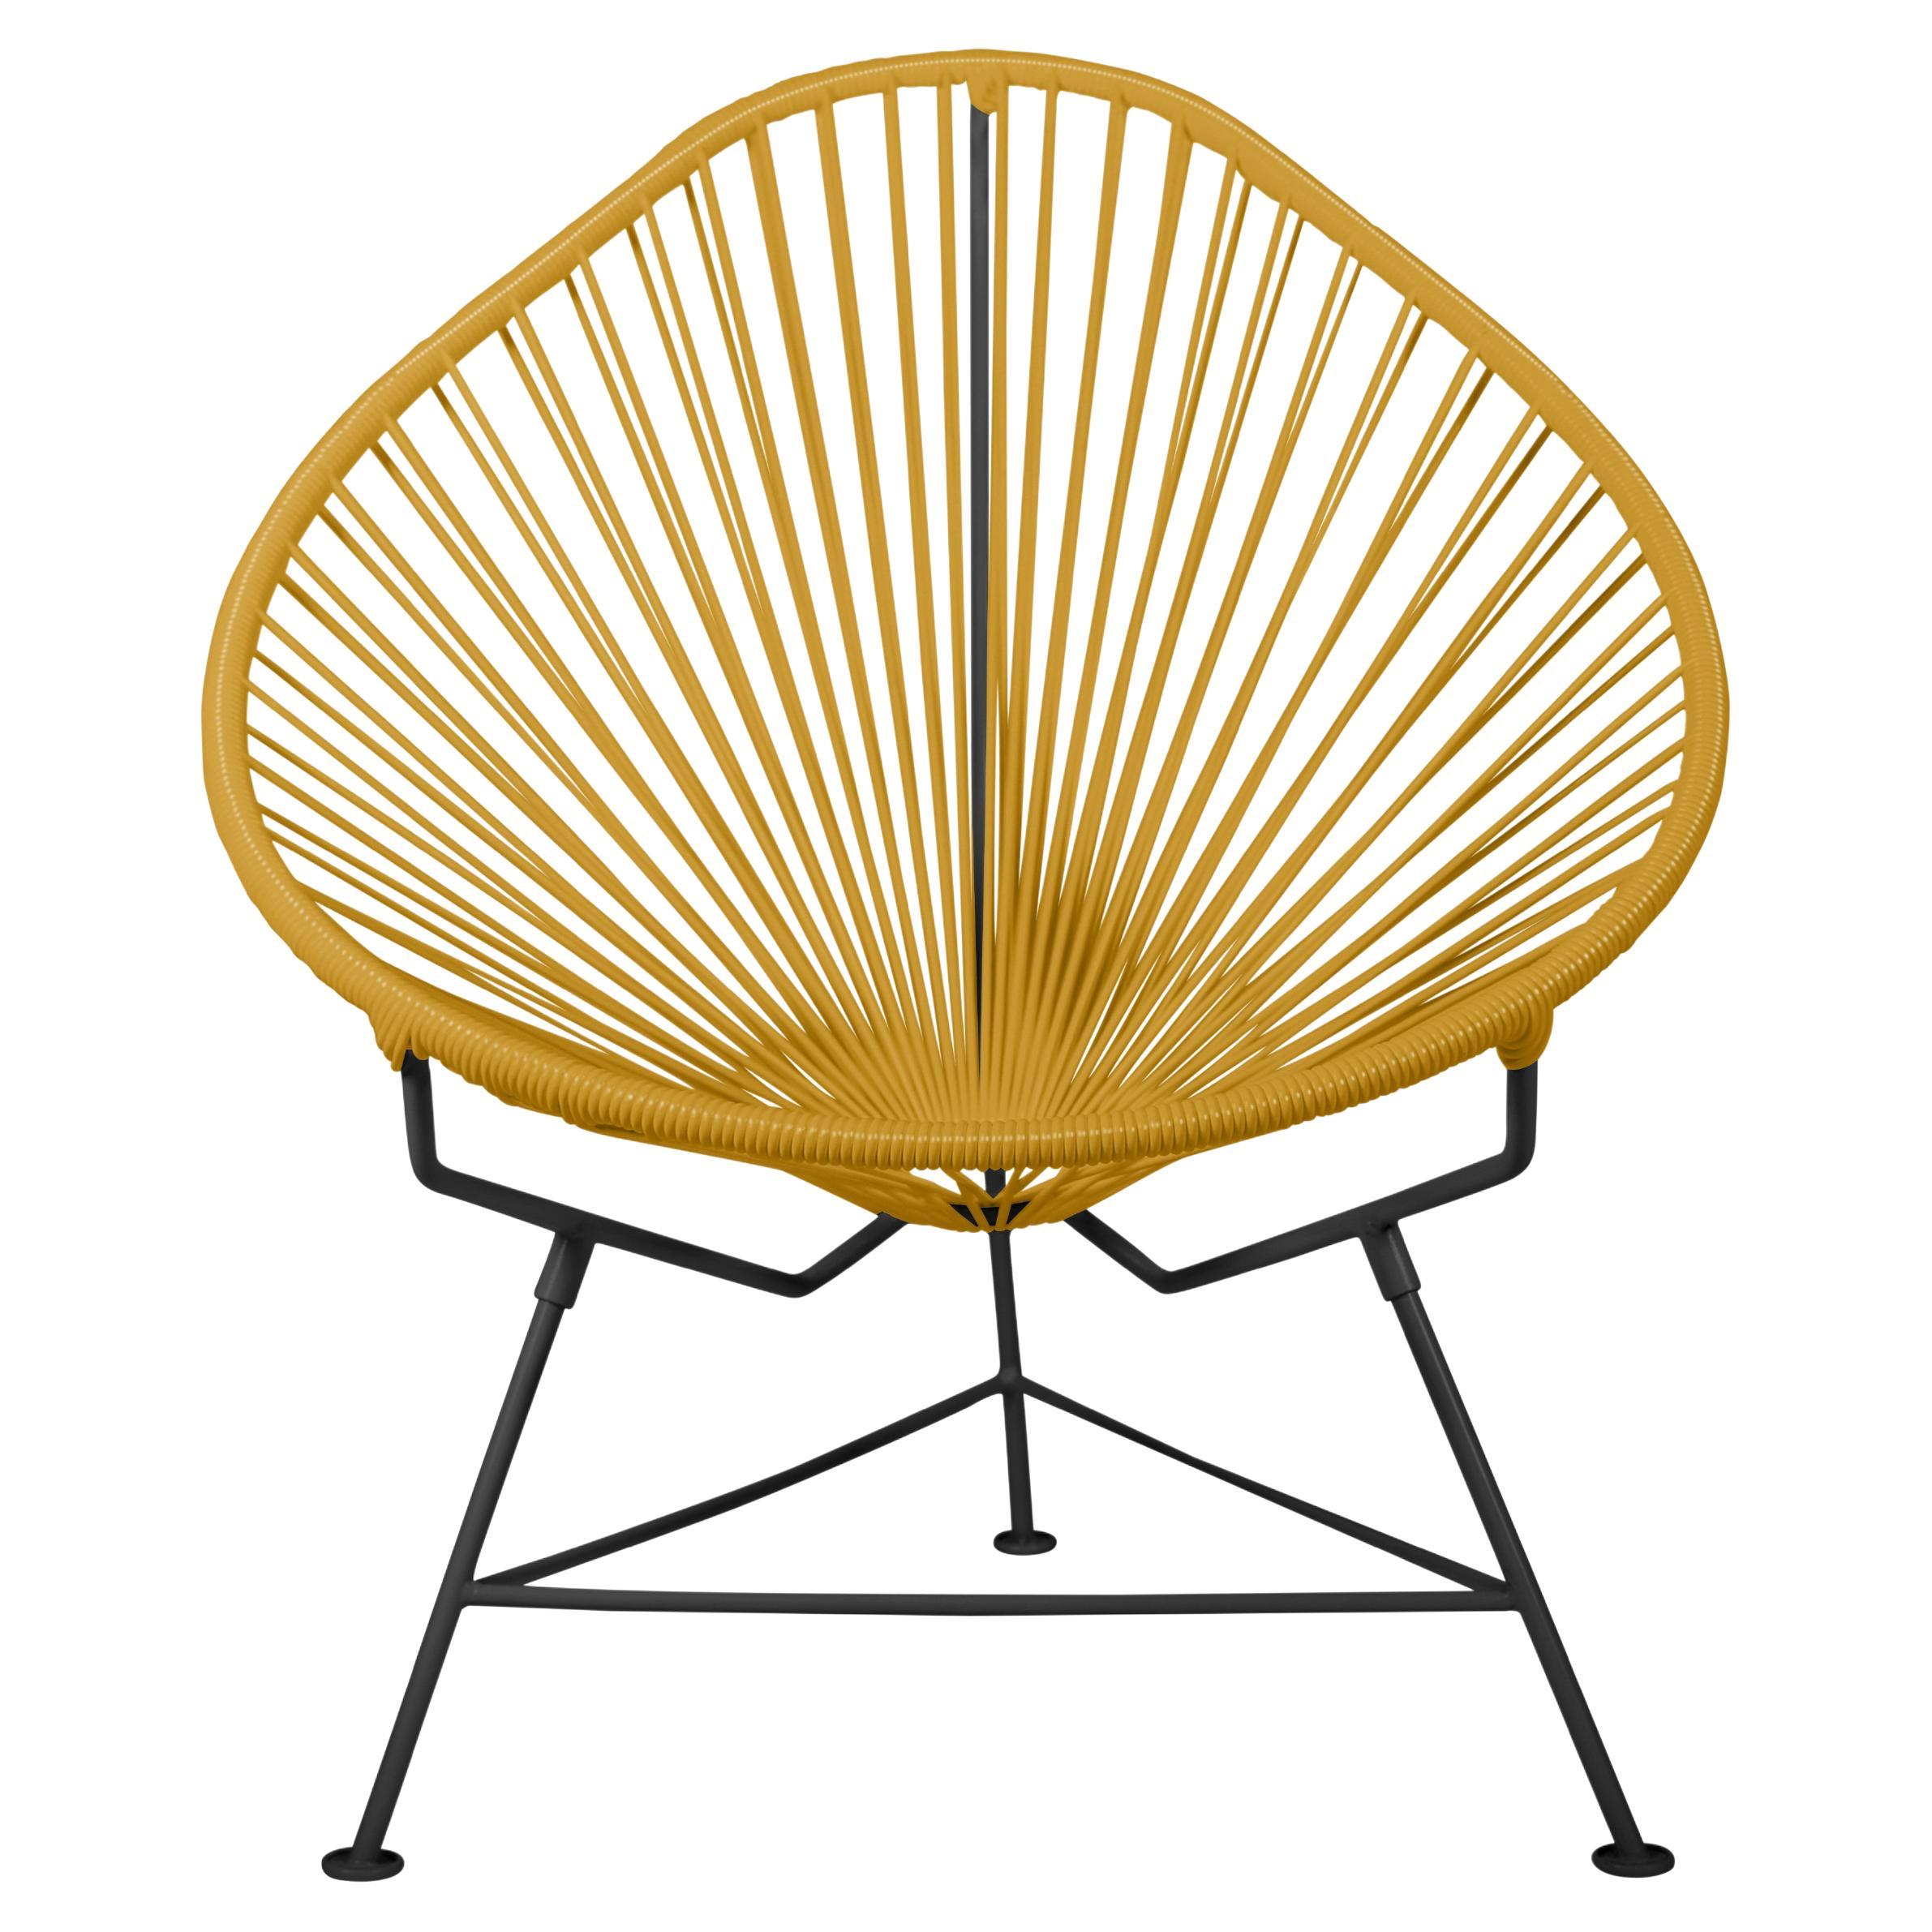 Innit Designs Acapulco Chair Caramel Weave on Black Frame For Sale